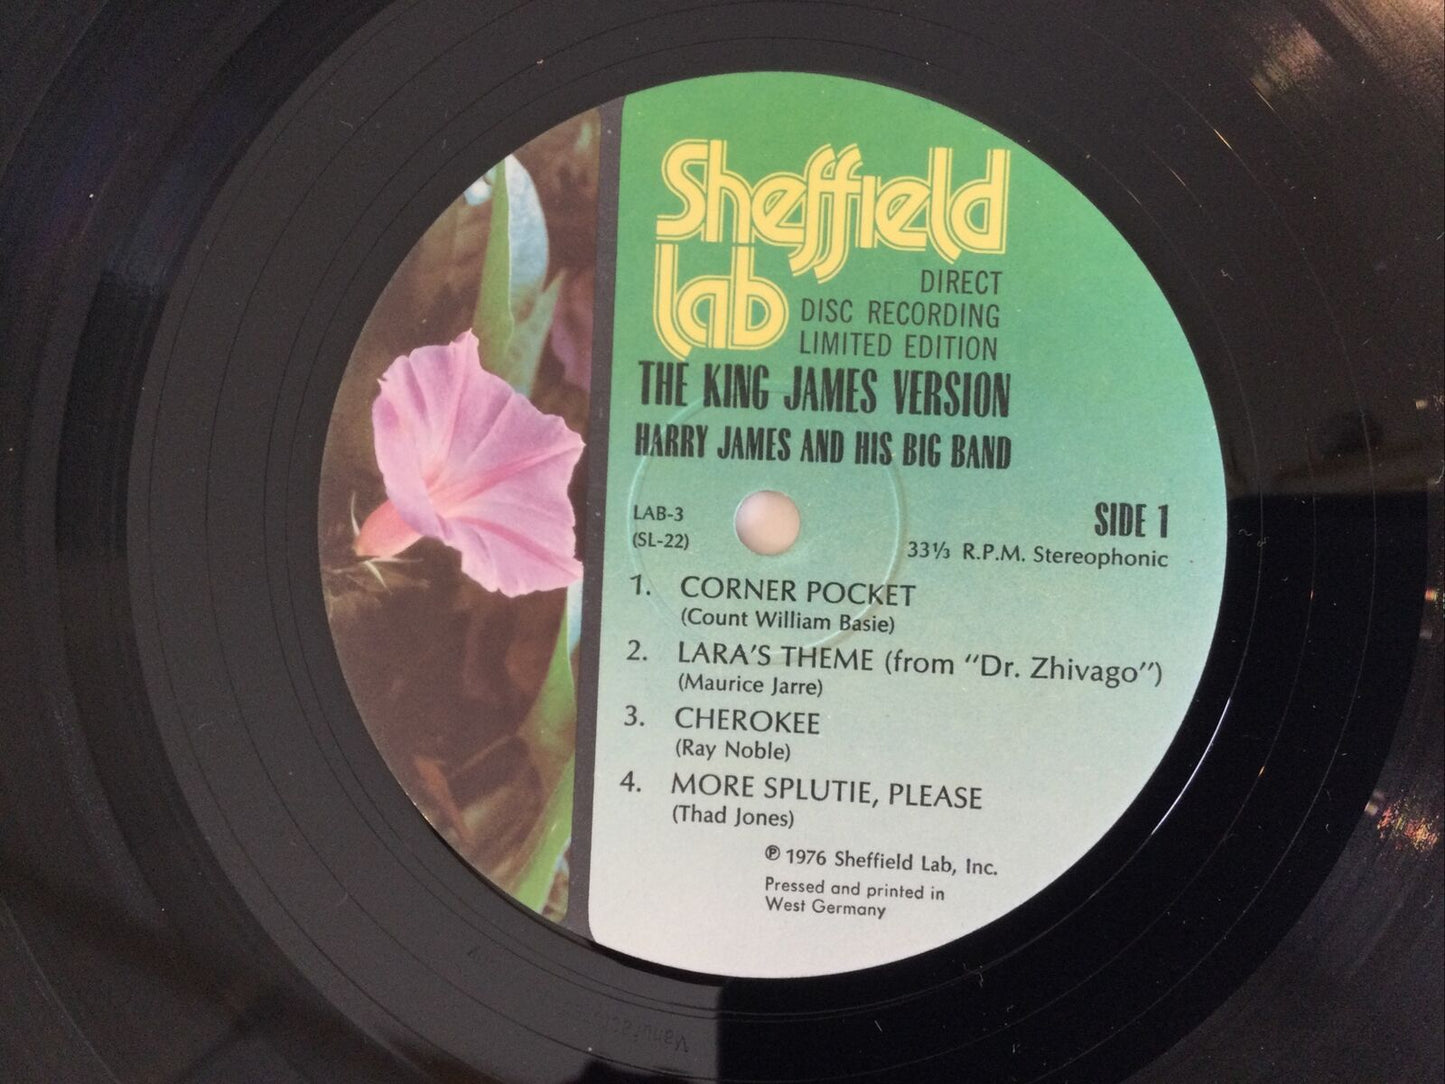 Harry James & His Big Band The King James Version LAB-3 Direct Disc Lp